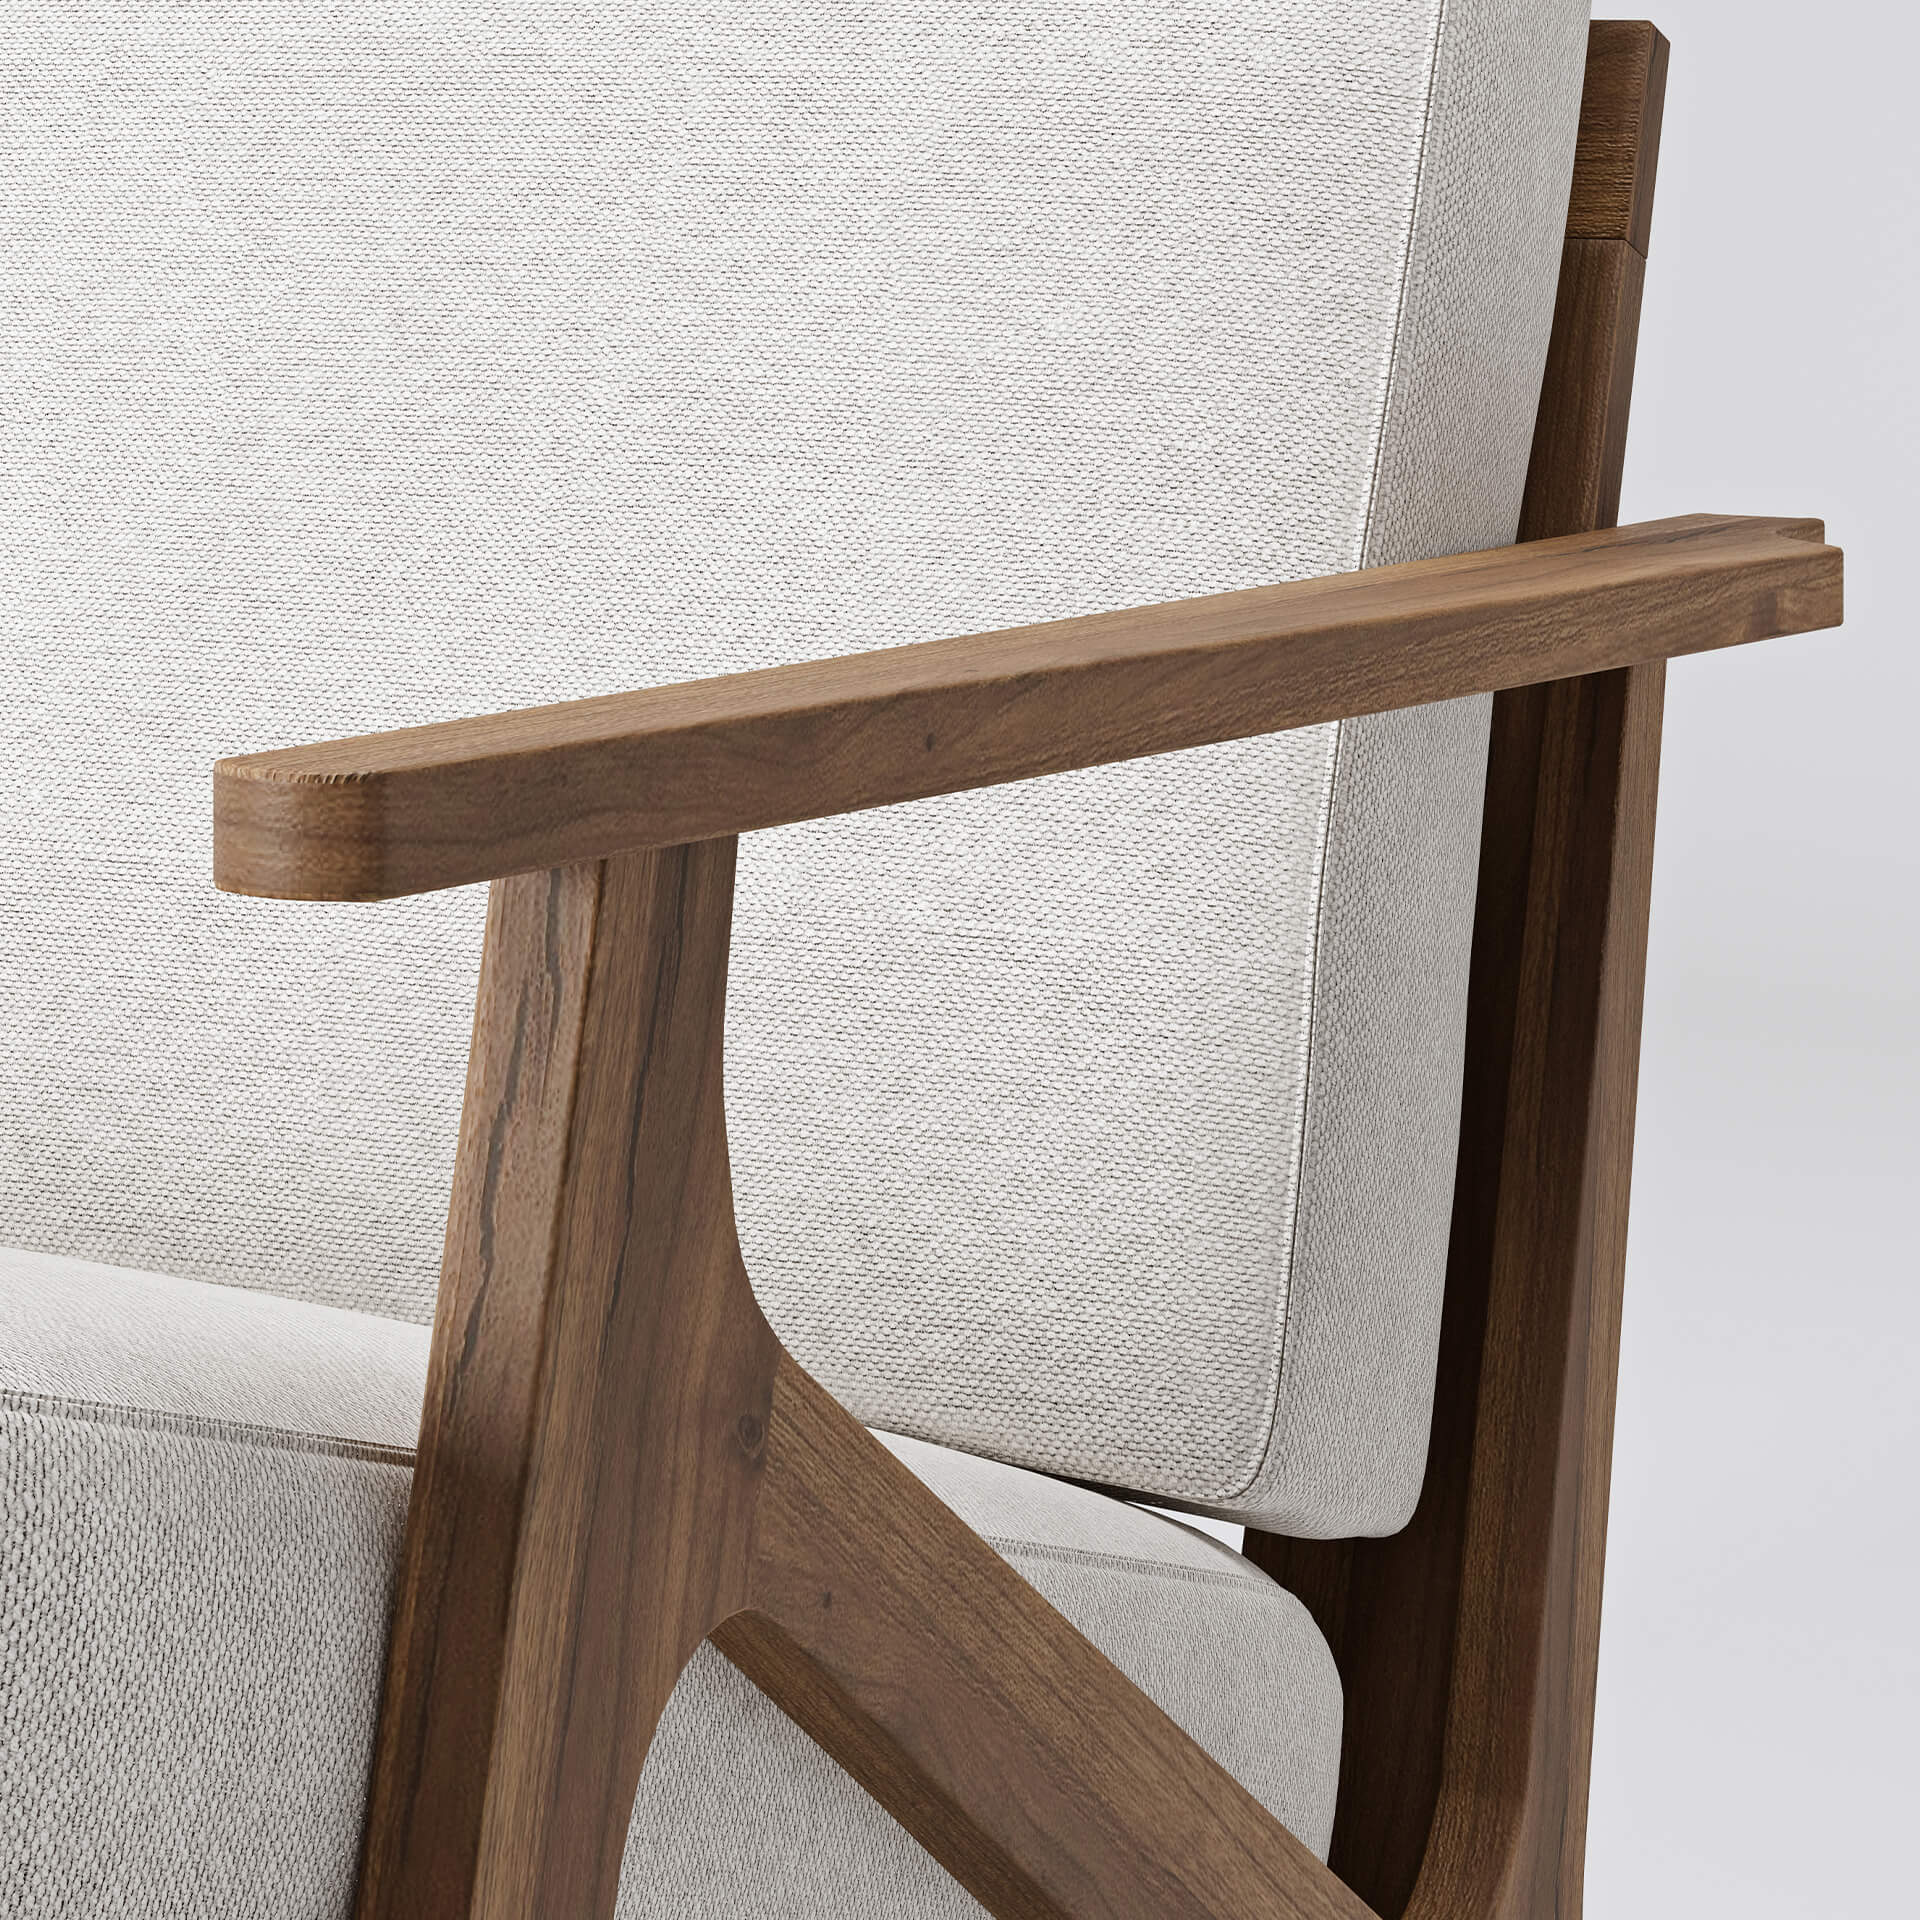 Close-Up 3D Render of Wooden Chair